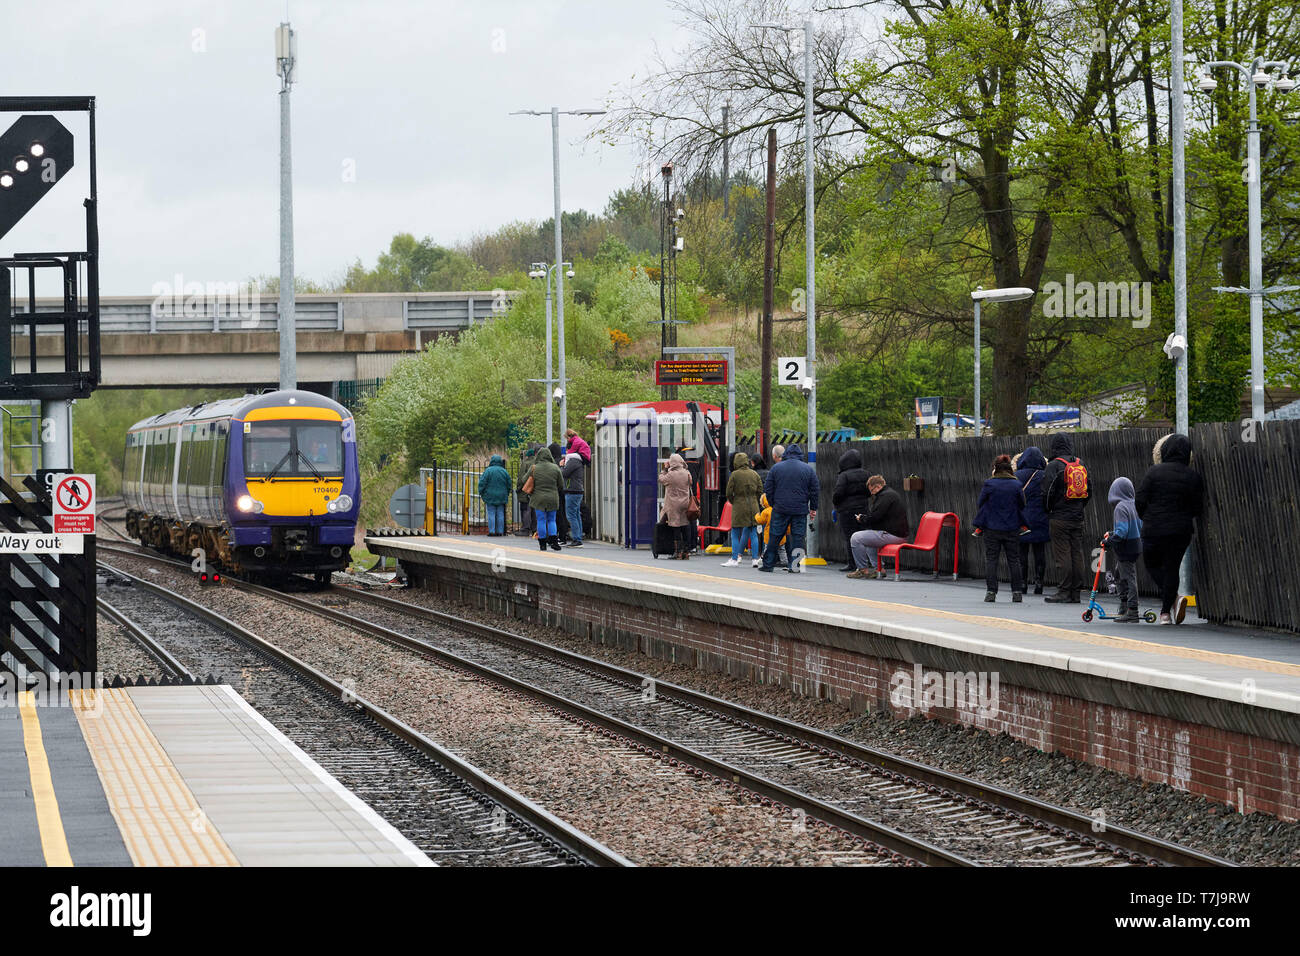 Passengers waiting for local trains at Micklefield, West Yorkshire, Northern England, UK Stock Photo